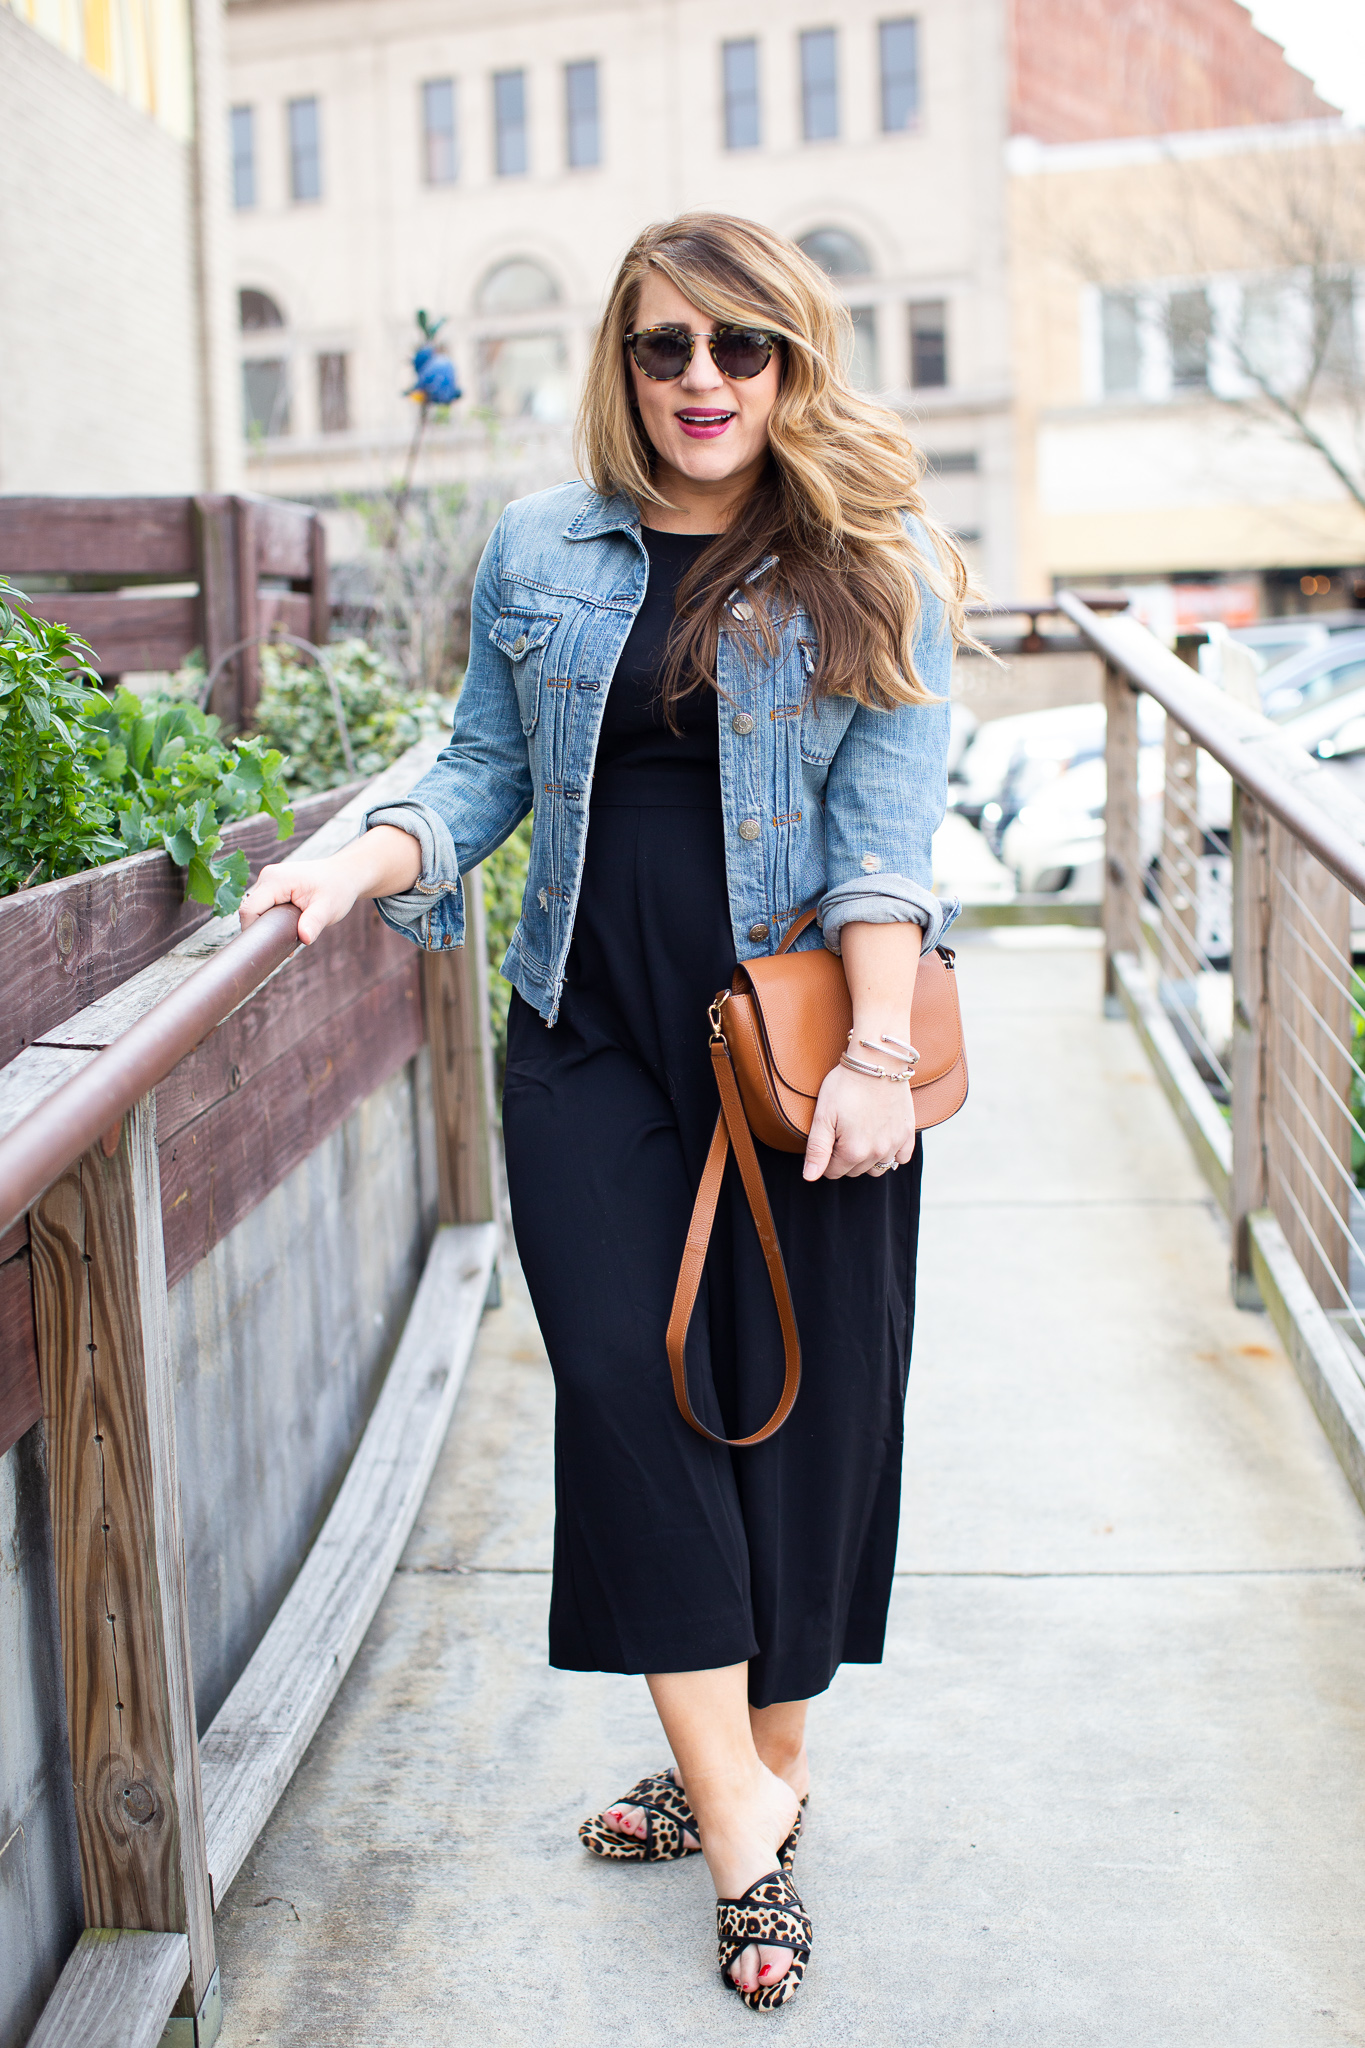 Leopard Flats styled by popular North Carolina fashion blogger, Coffee Beans and Bobby Pins